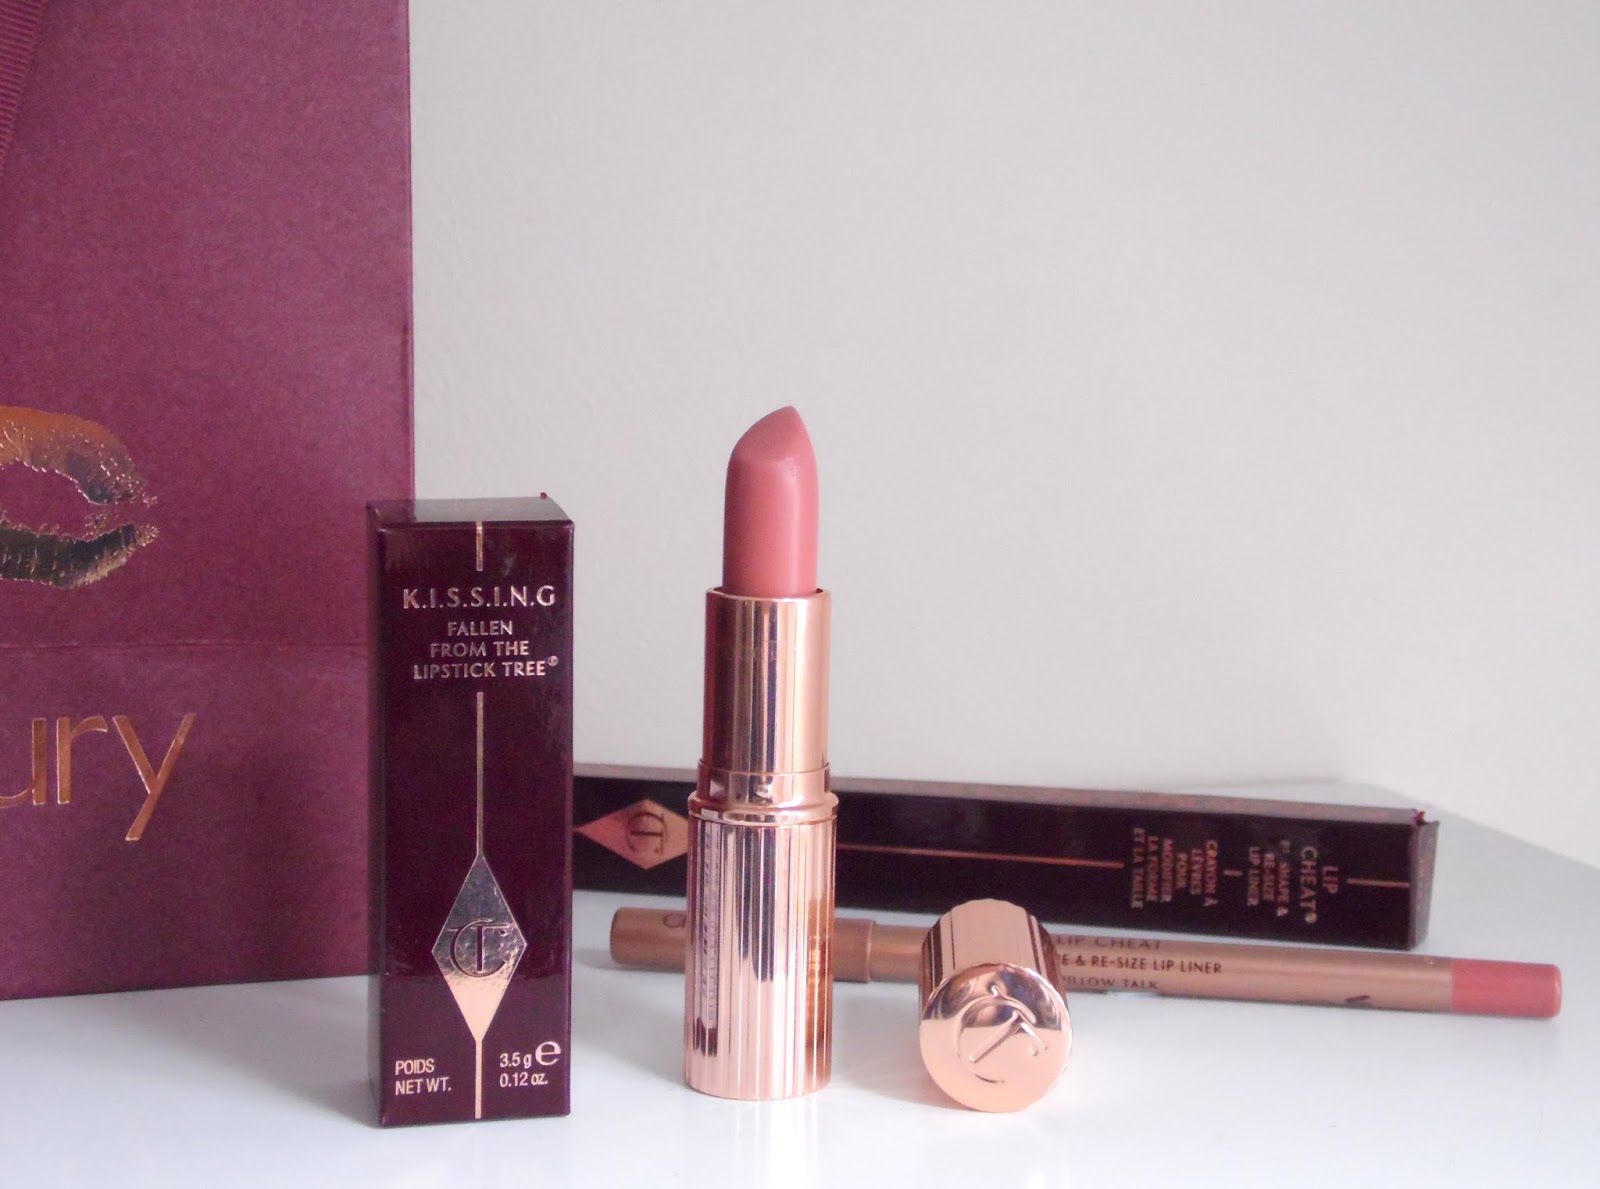 Charlotte tilbury lipstick in gold packaging with a lip liner 